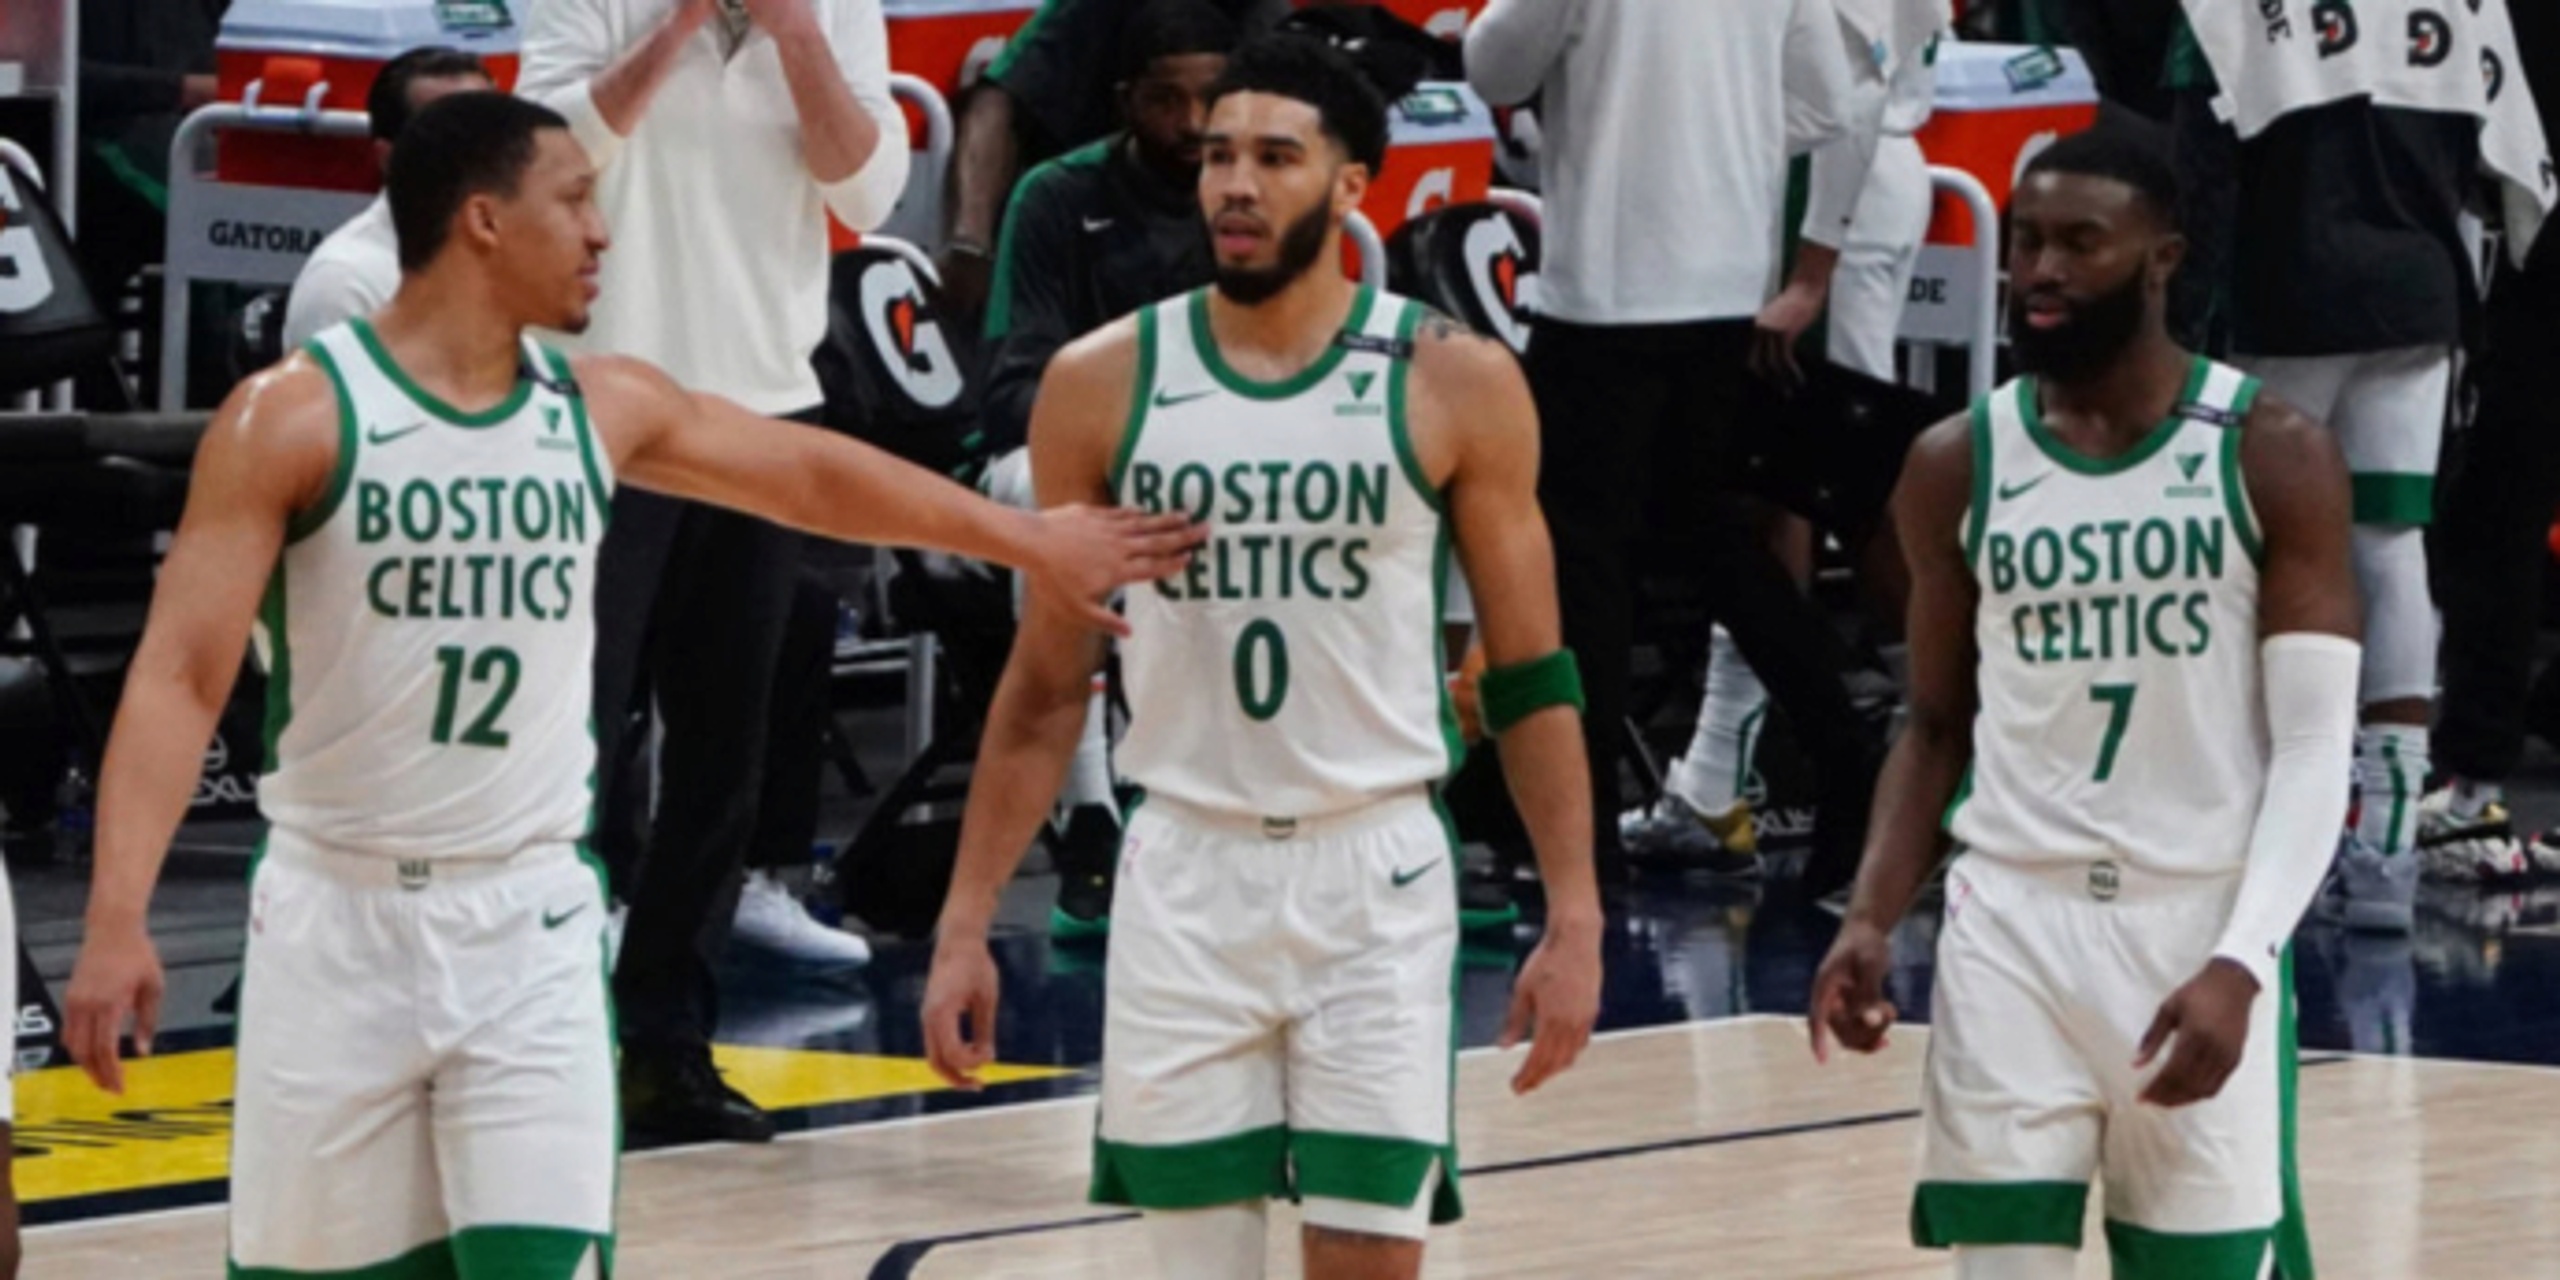 In a cursed year, Celtics fans shouldn't place any blame on the players